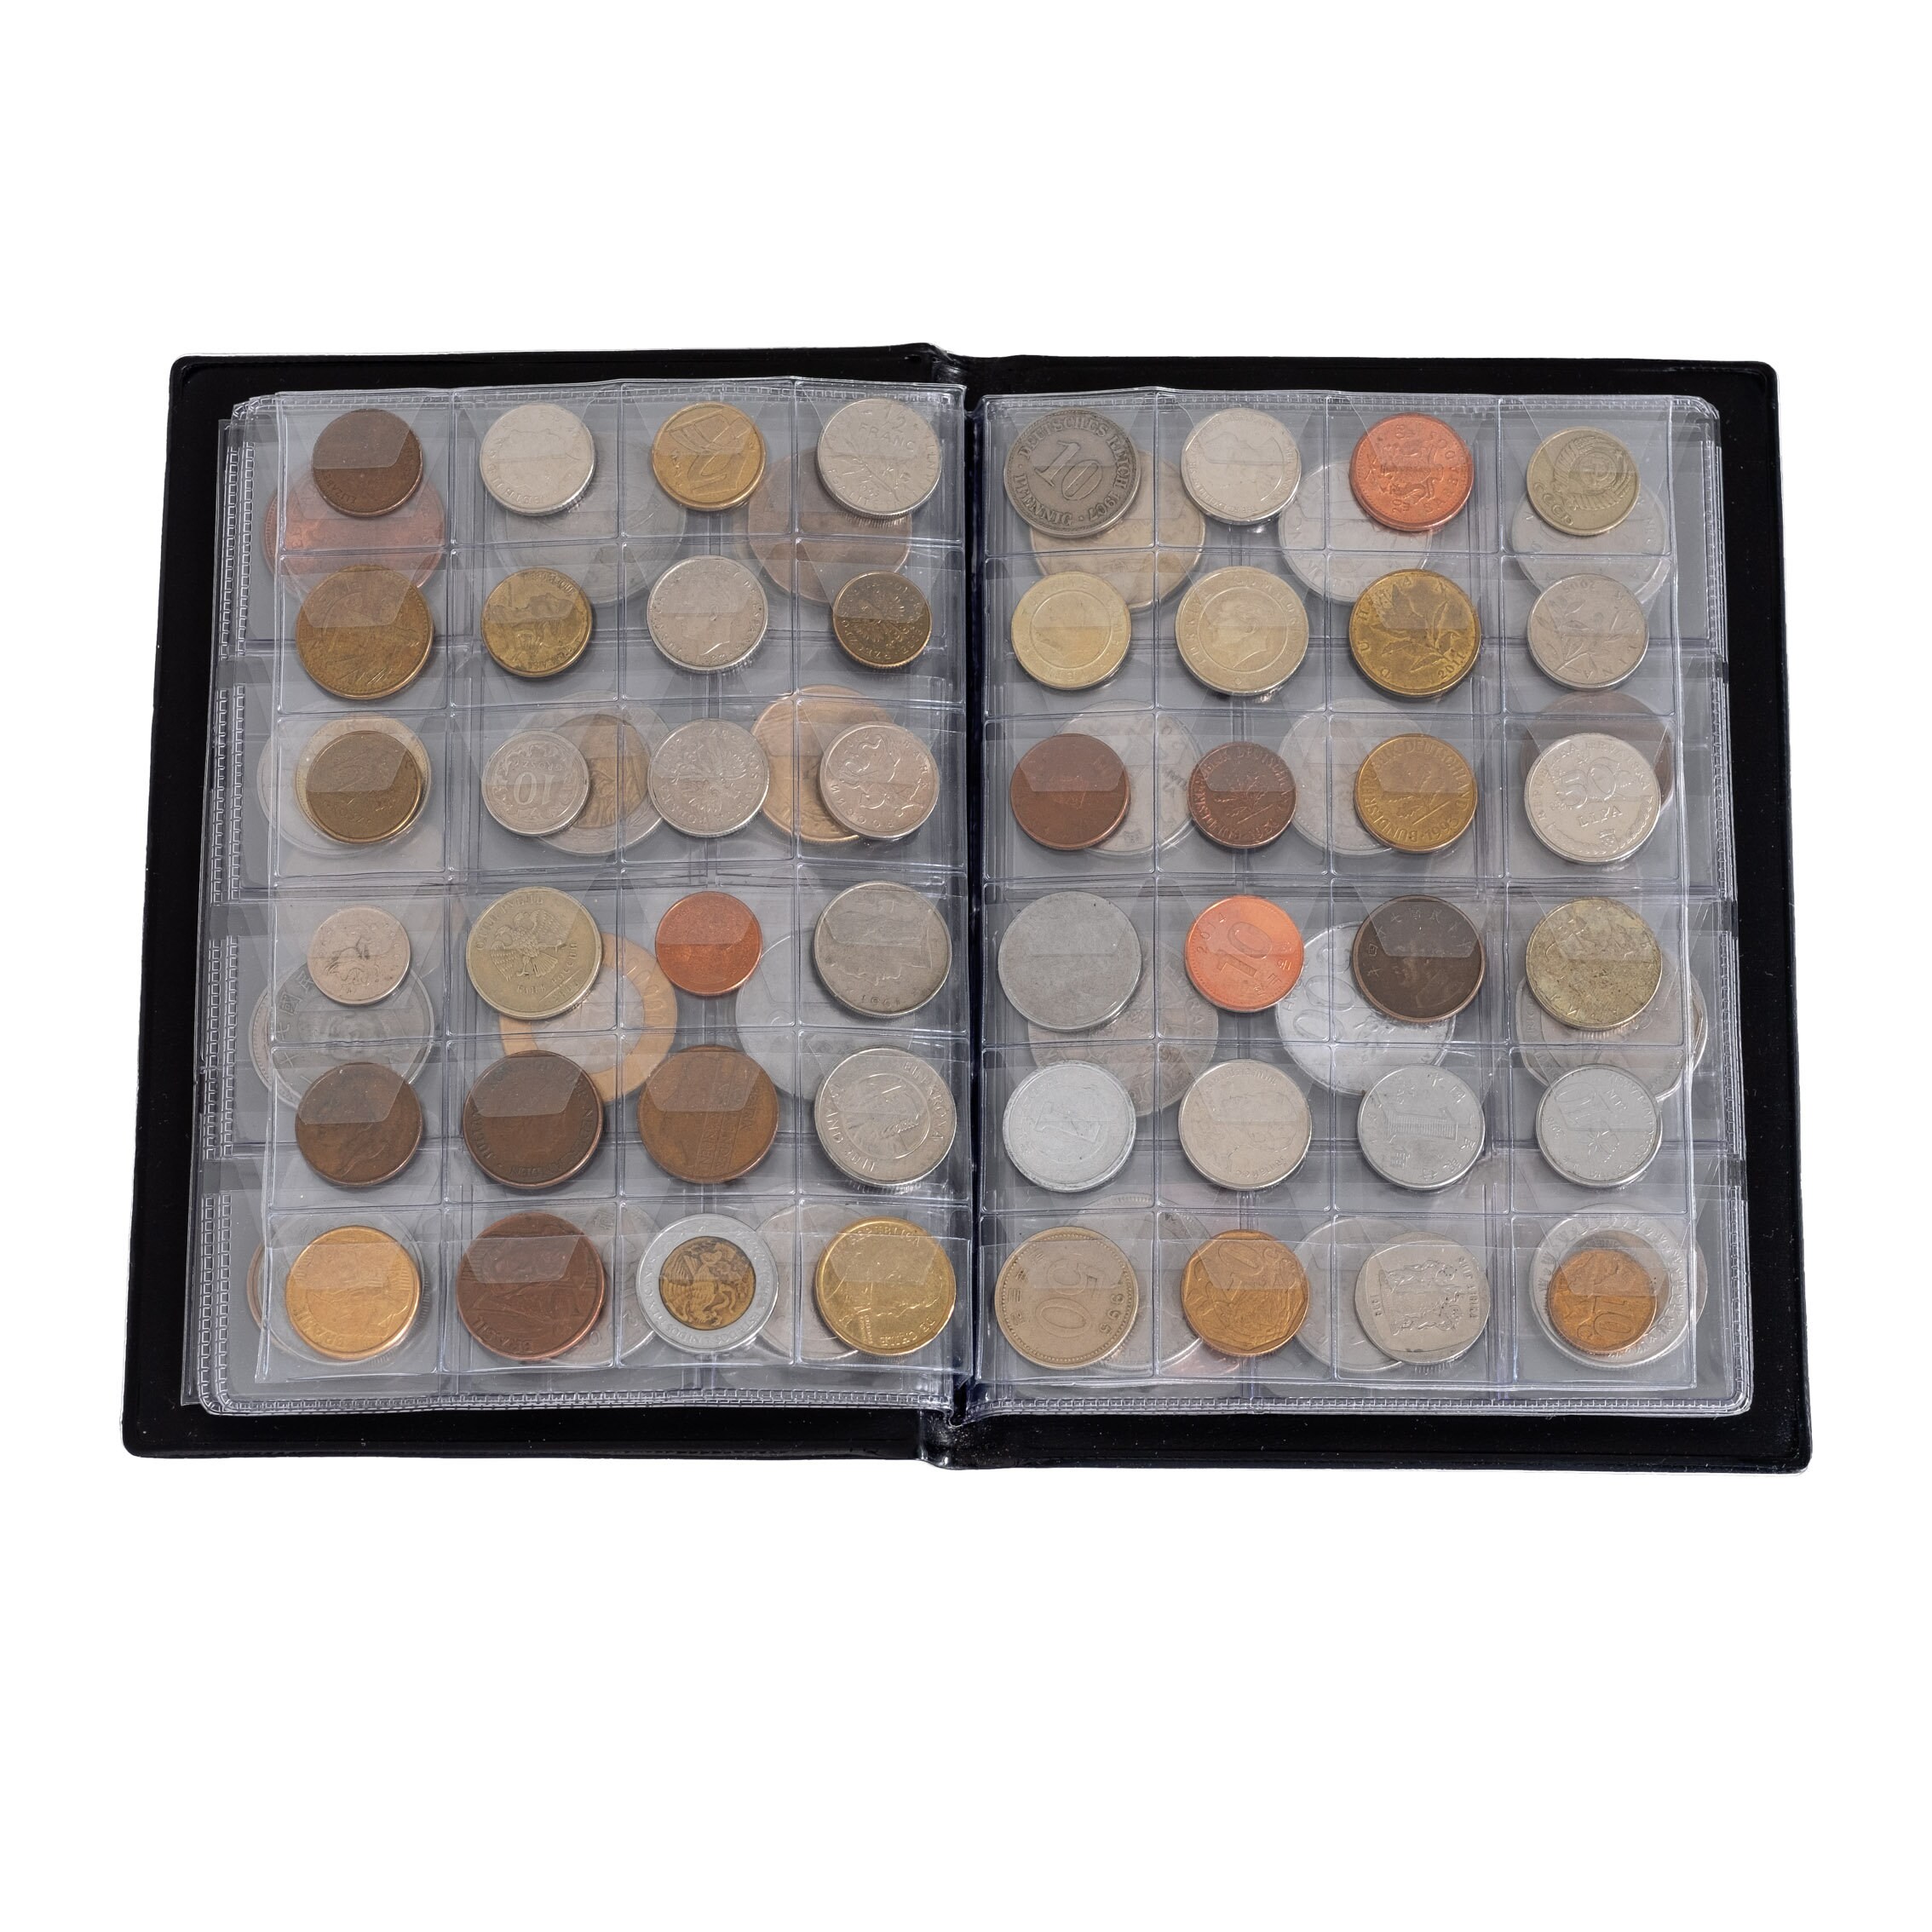  108 Coin Collection Including Currency Album, Full Numismatic  Book of Different Coins, 50 Unique Foreign Countries, Complete Coins  Collections